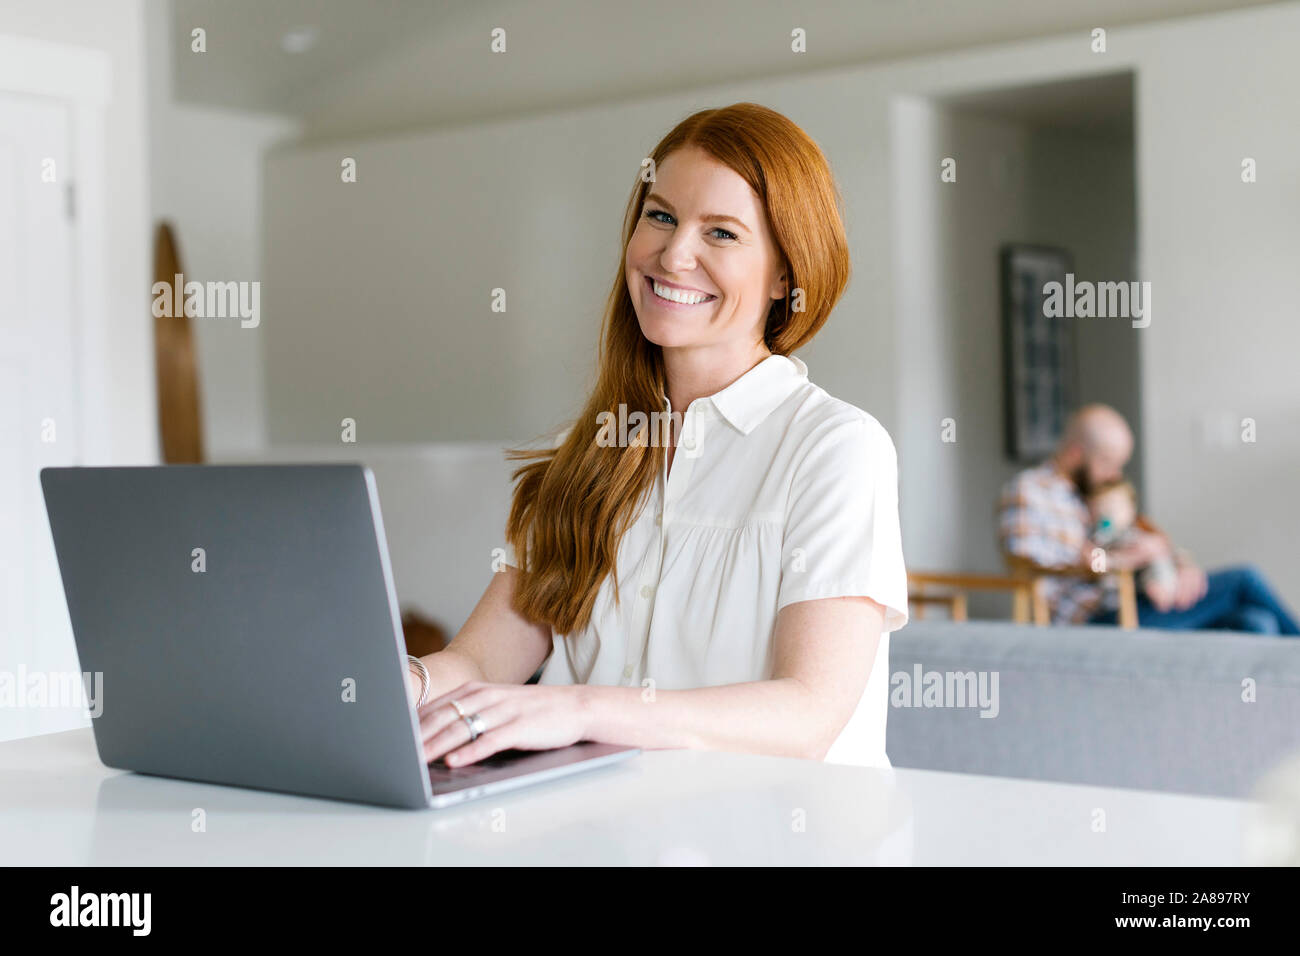 Smiling woman using laptop at home Stock Photo